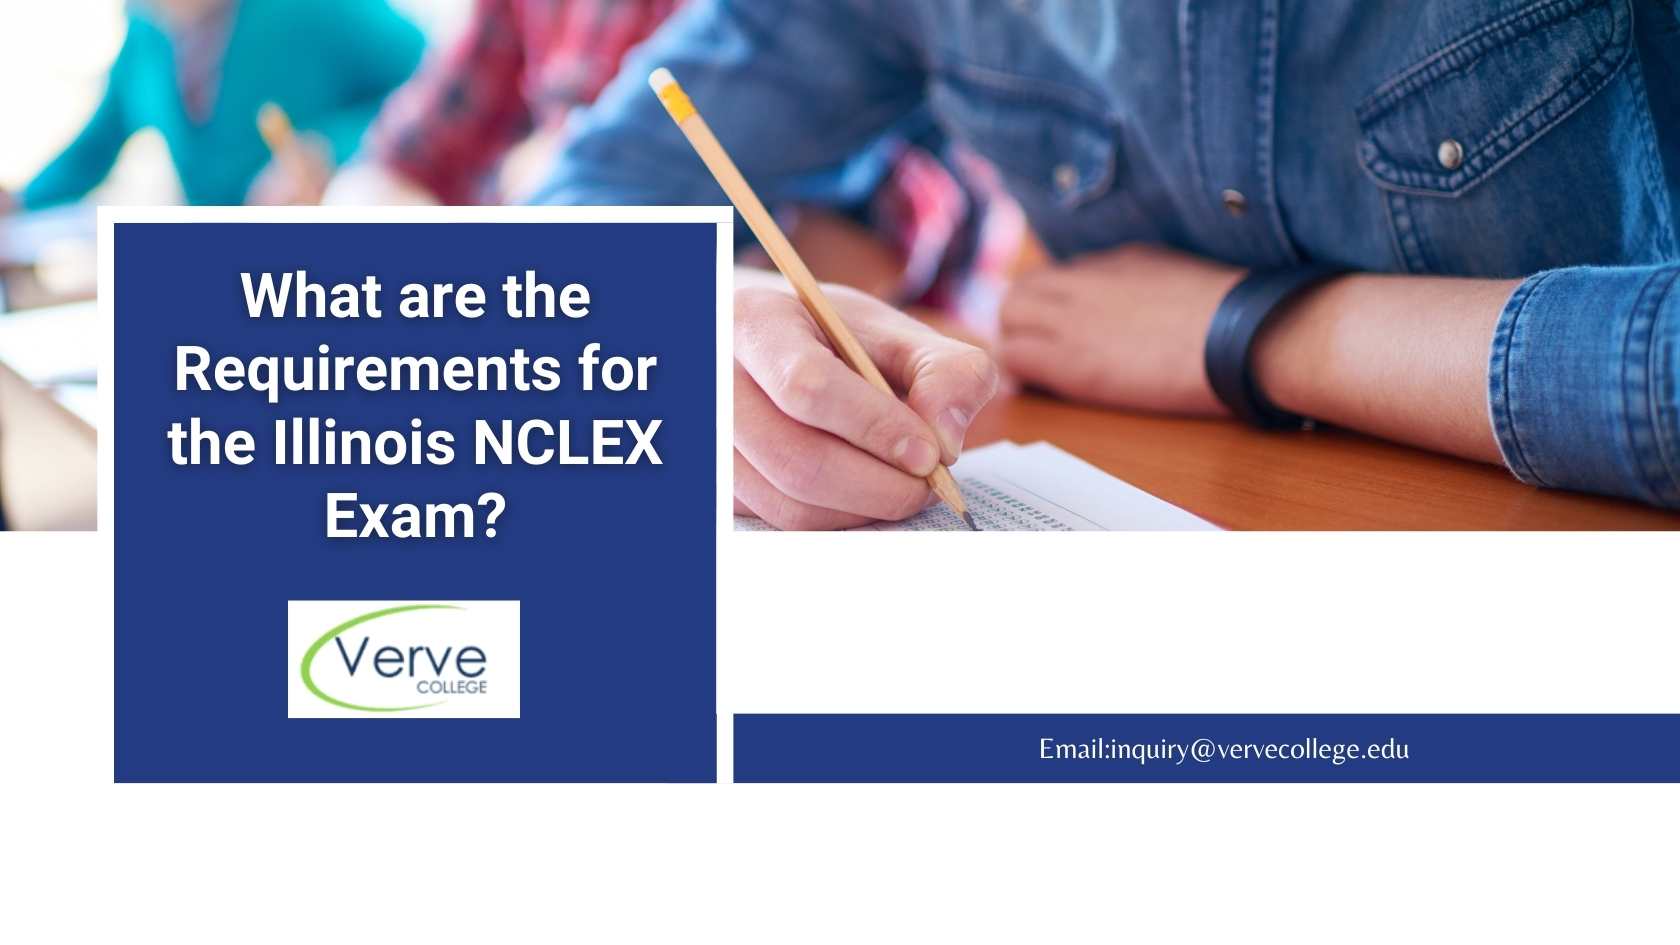 What are the Requirements for the Illinois NCLEX Exam?